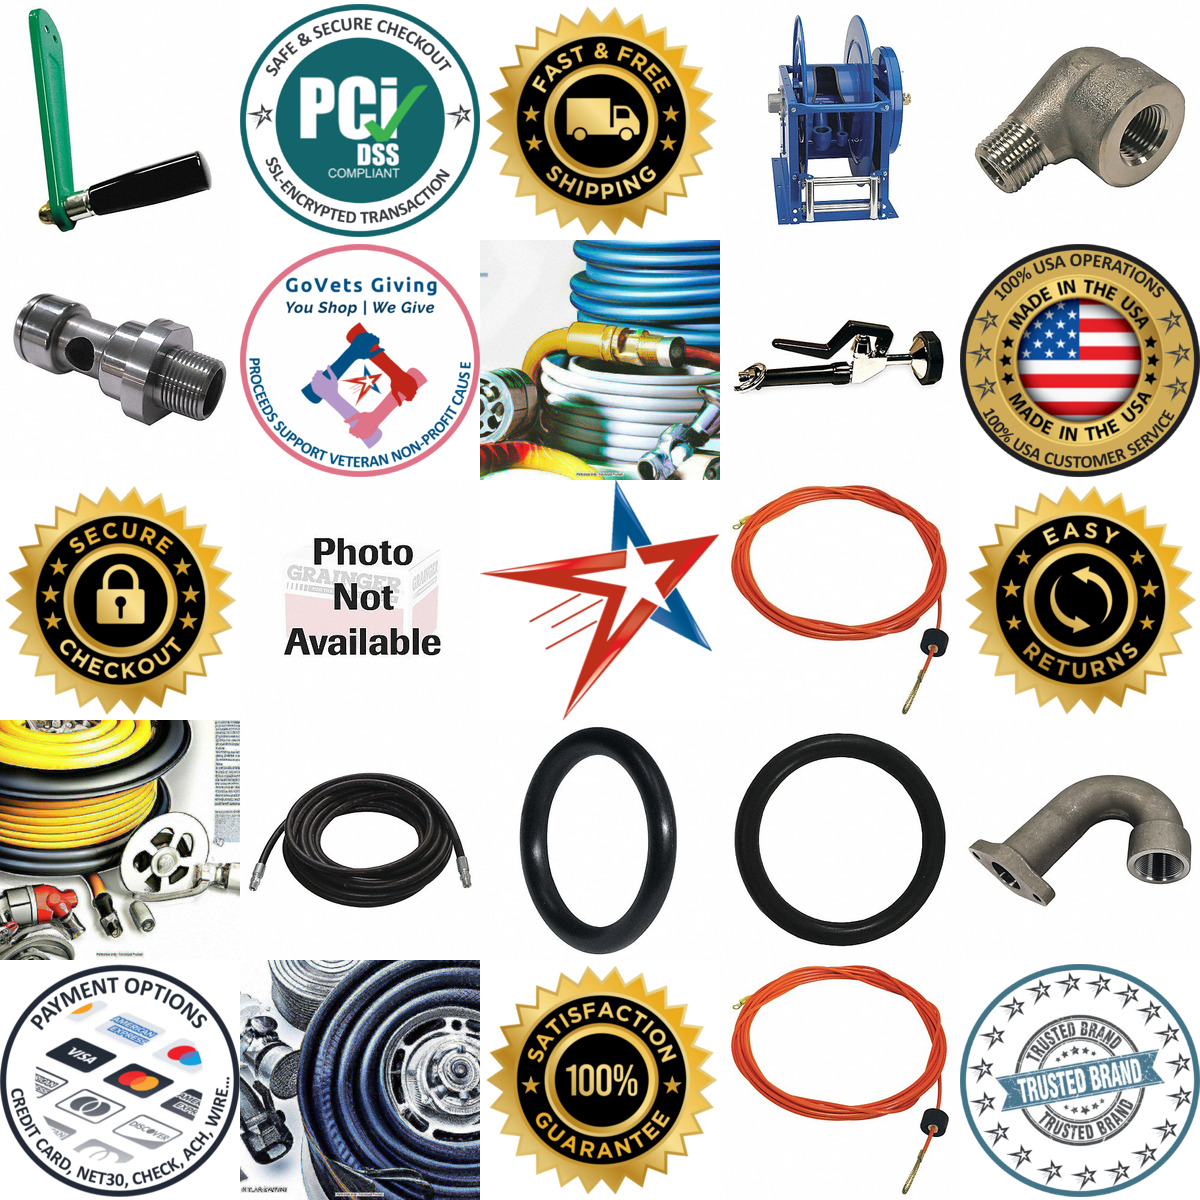 A selection of Hose Reel Parts and Accessories products on GoVets